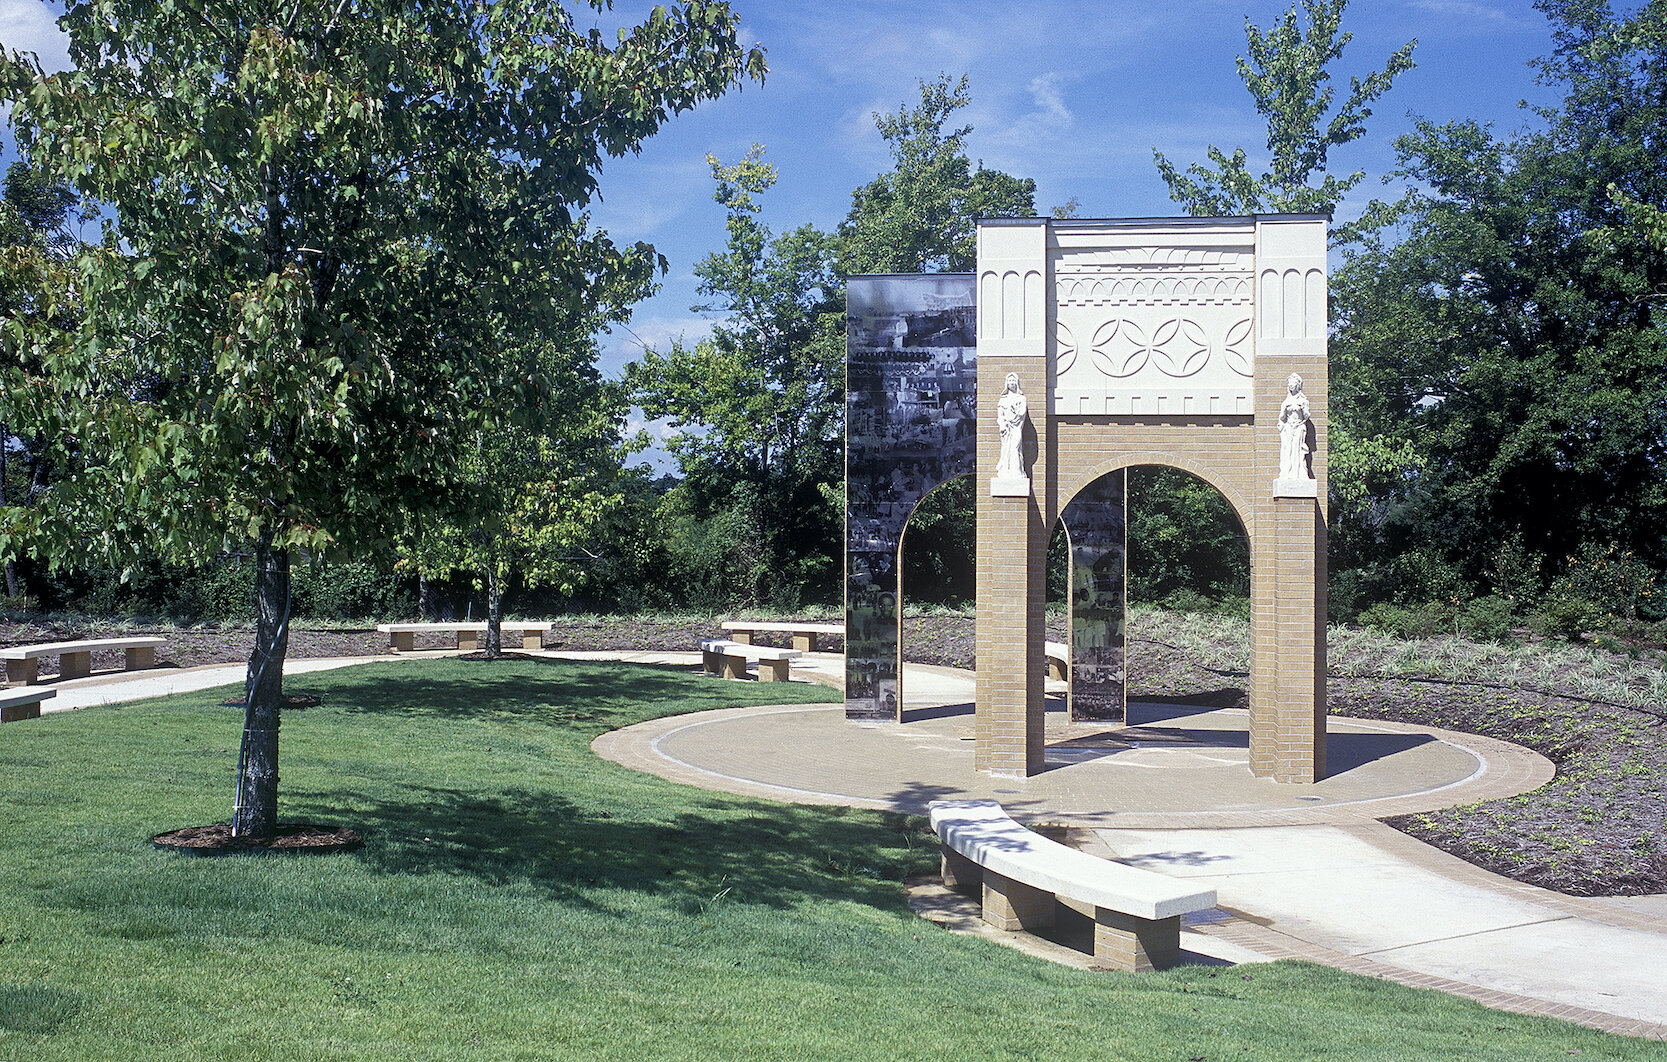   Commemorative Garden ,  15’ x 150’ x 150’, precast concrete, brick, stainless steel, Lexan plastic, trees and shrubs, a collaborative with artist Aaron P. Hussey, National Park Service, Little Rock, AR, 2001 